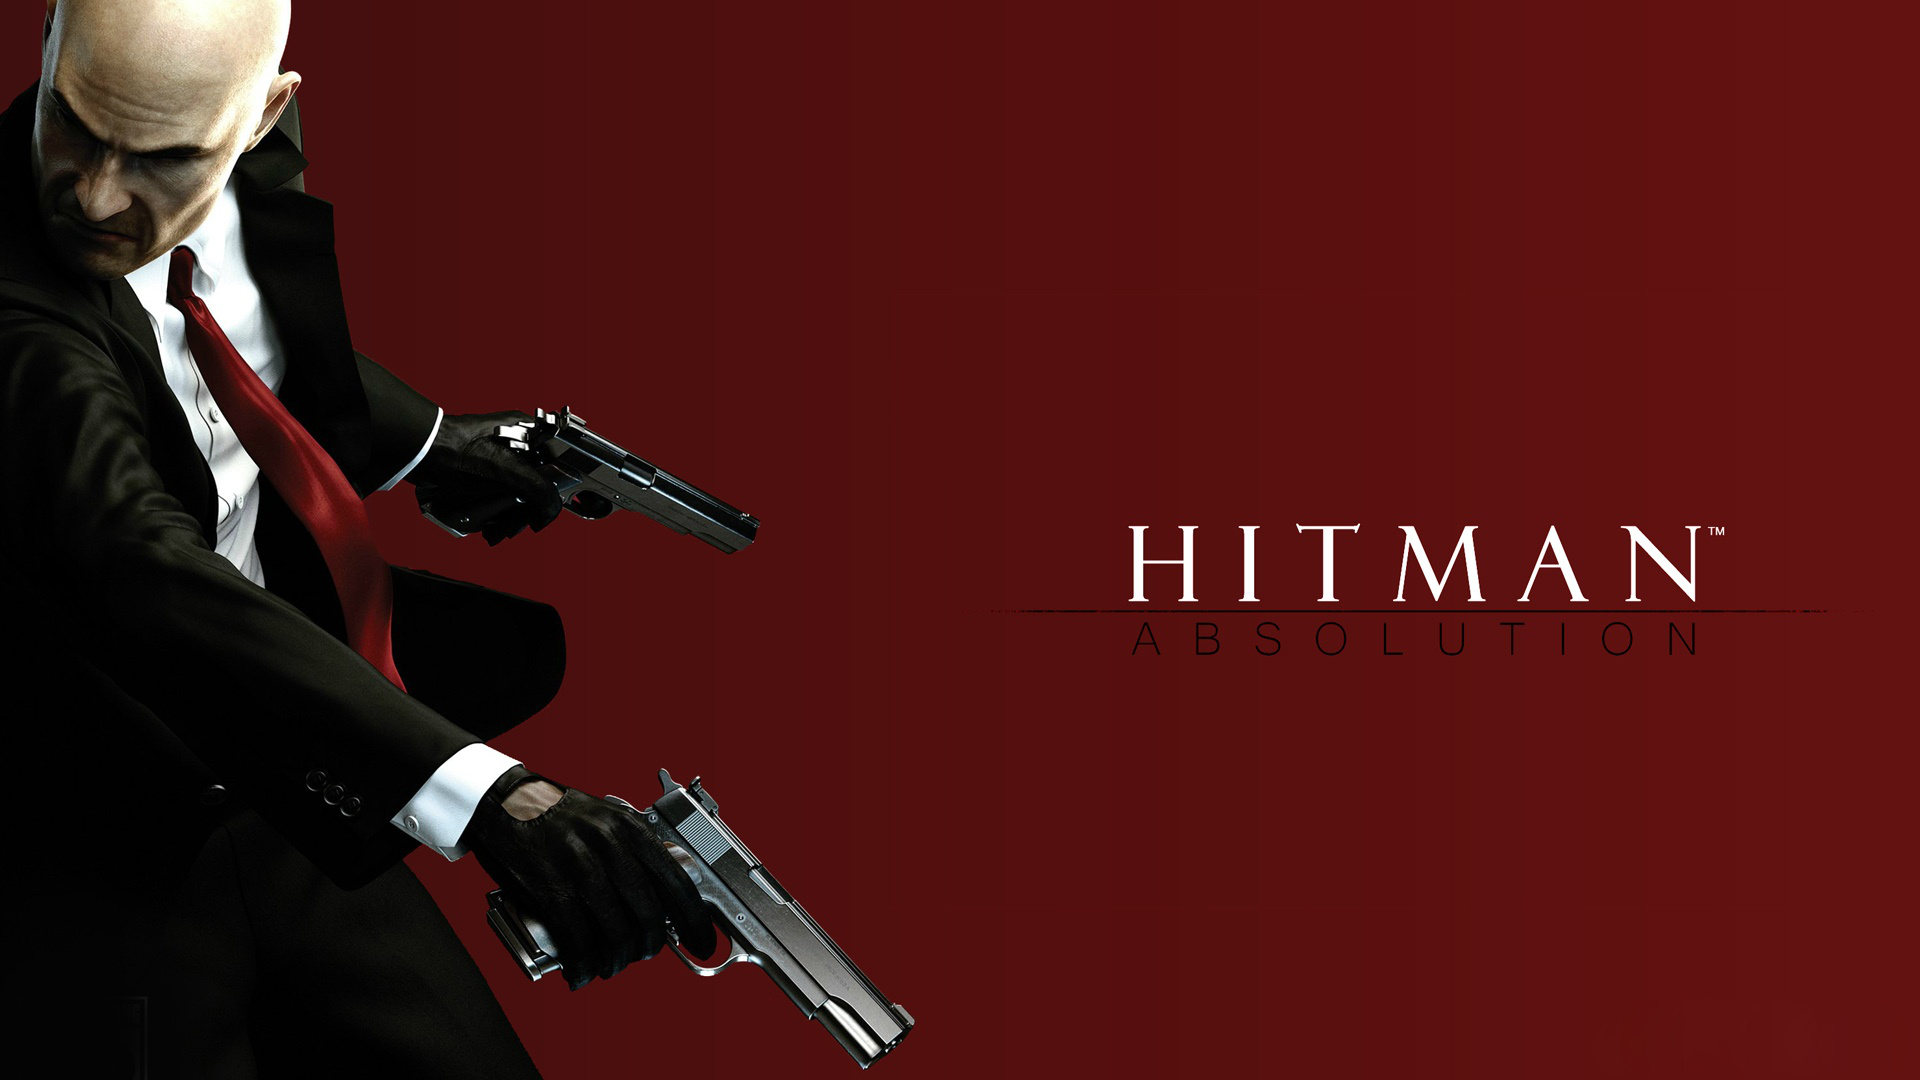 Video Game Hitman Absolution 1920x1080